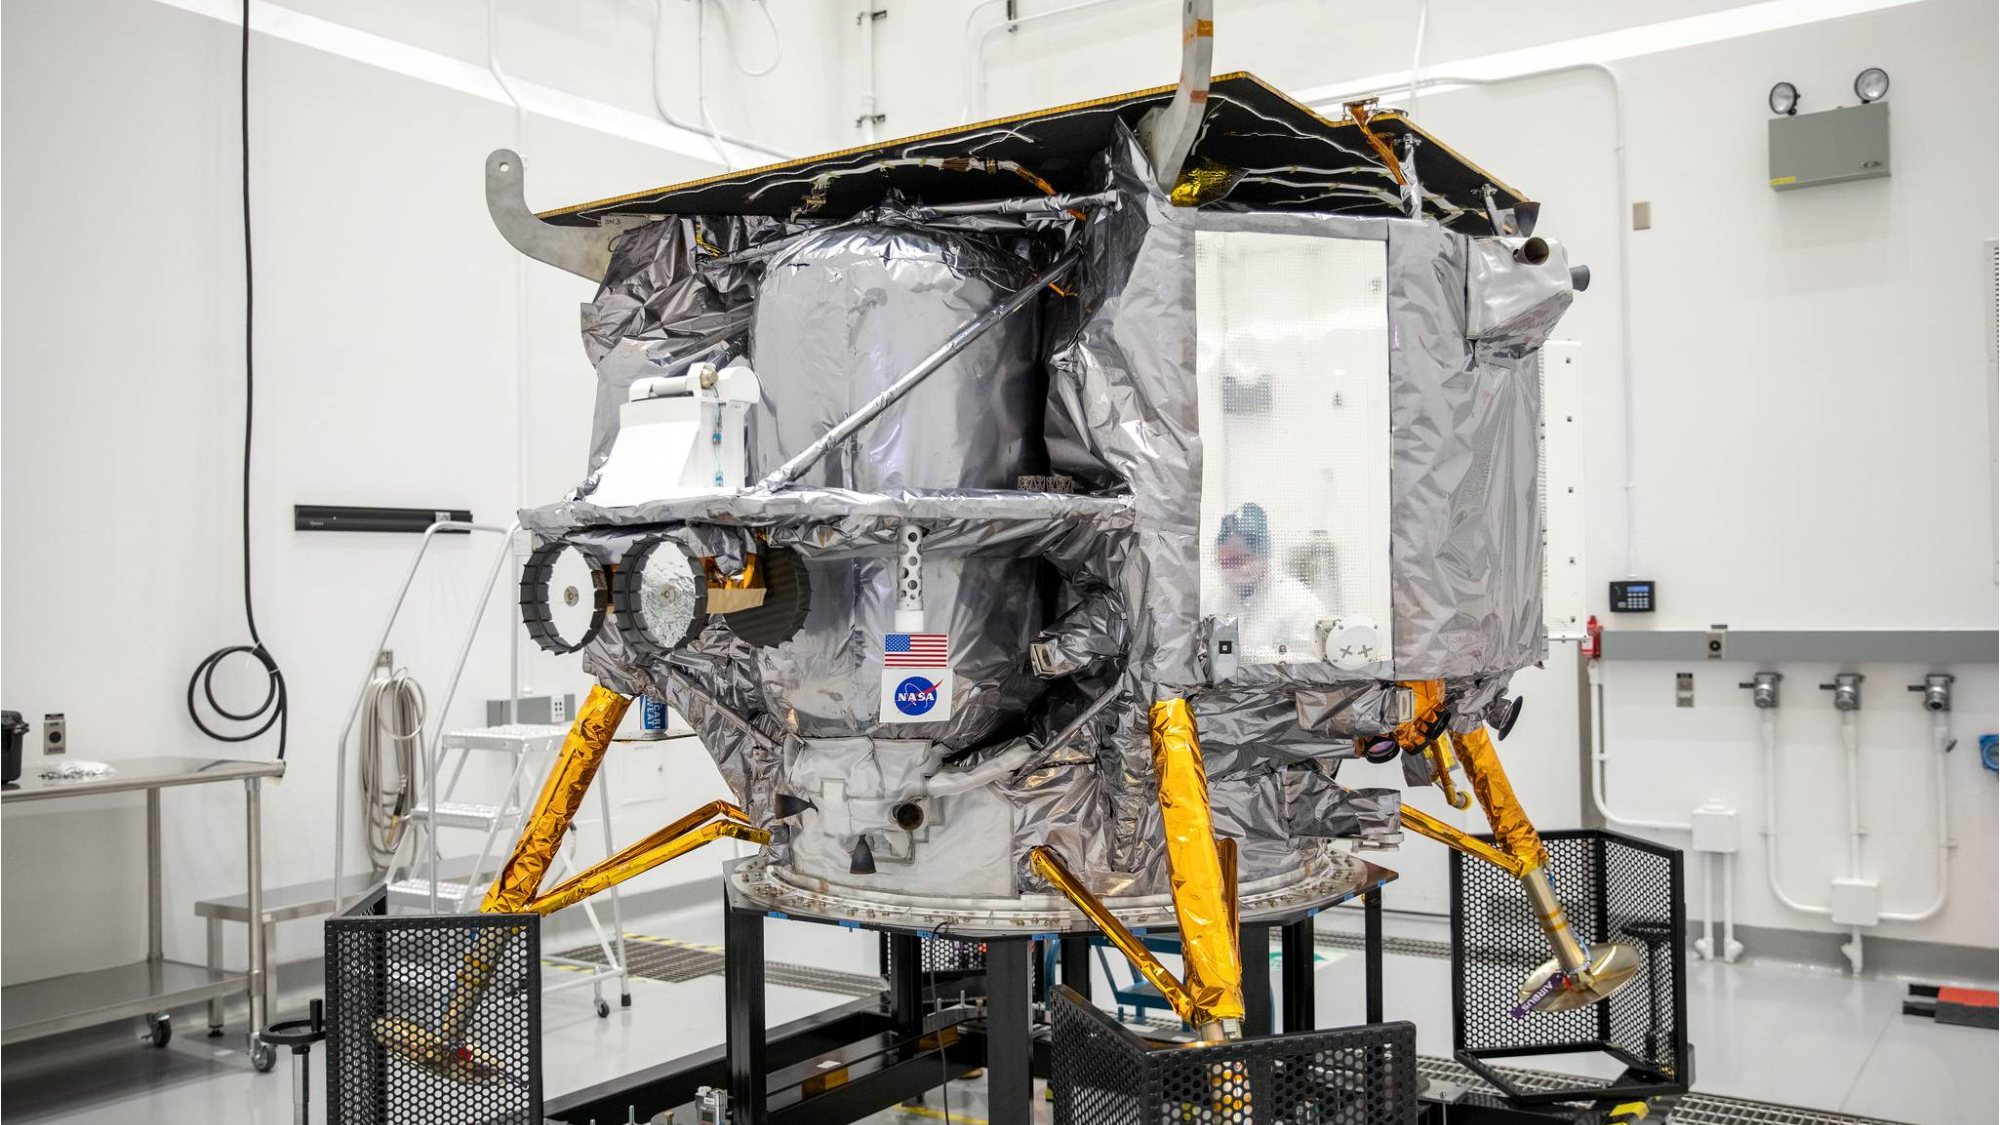 Stuck valve may have doomed private Peregrine moon lander mission, Astrobotic says